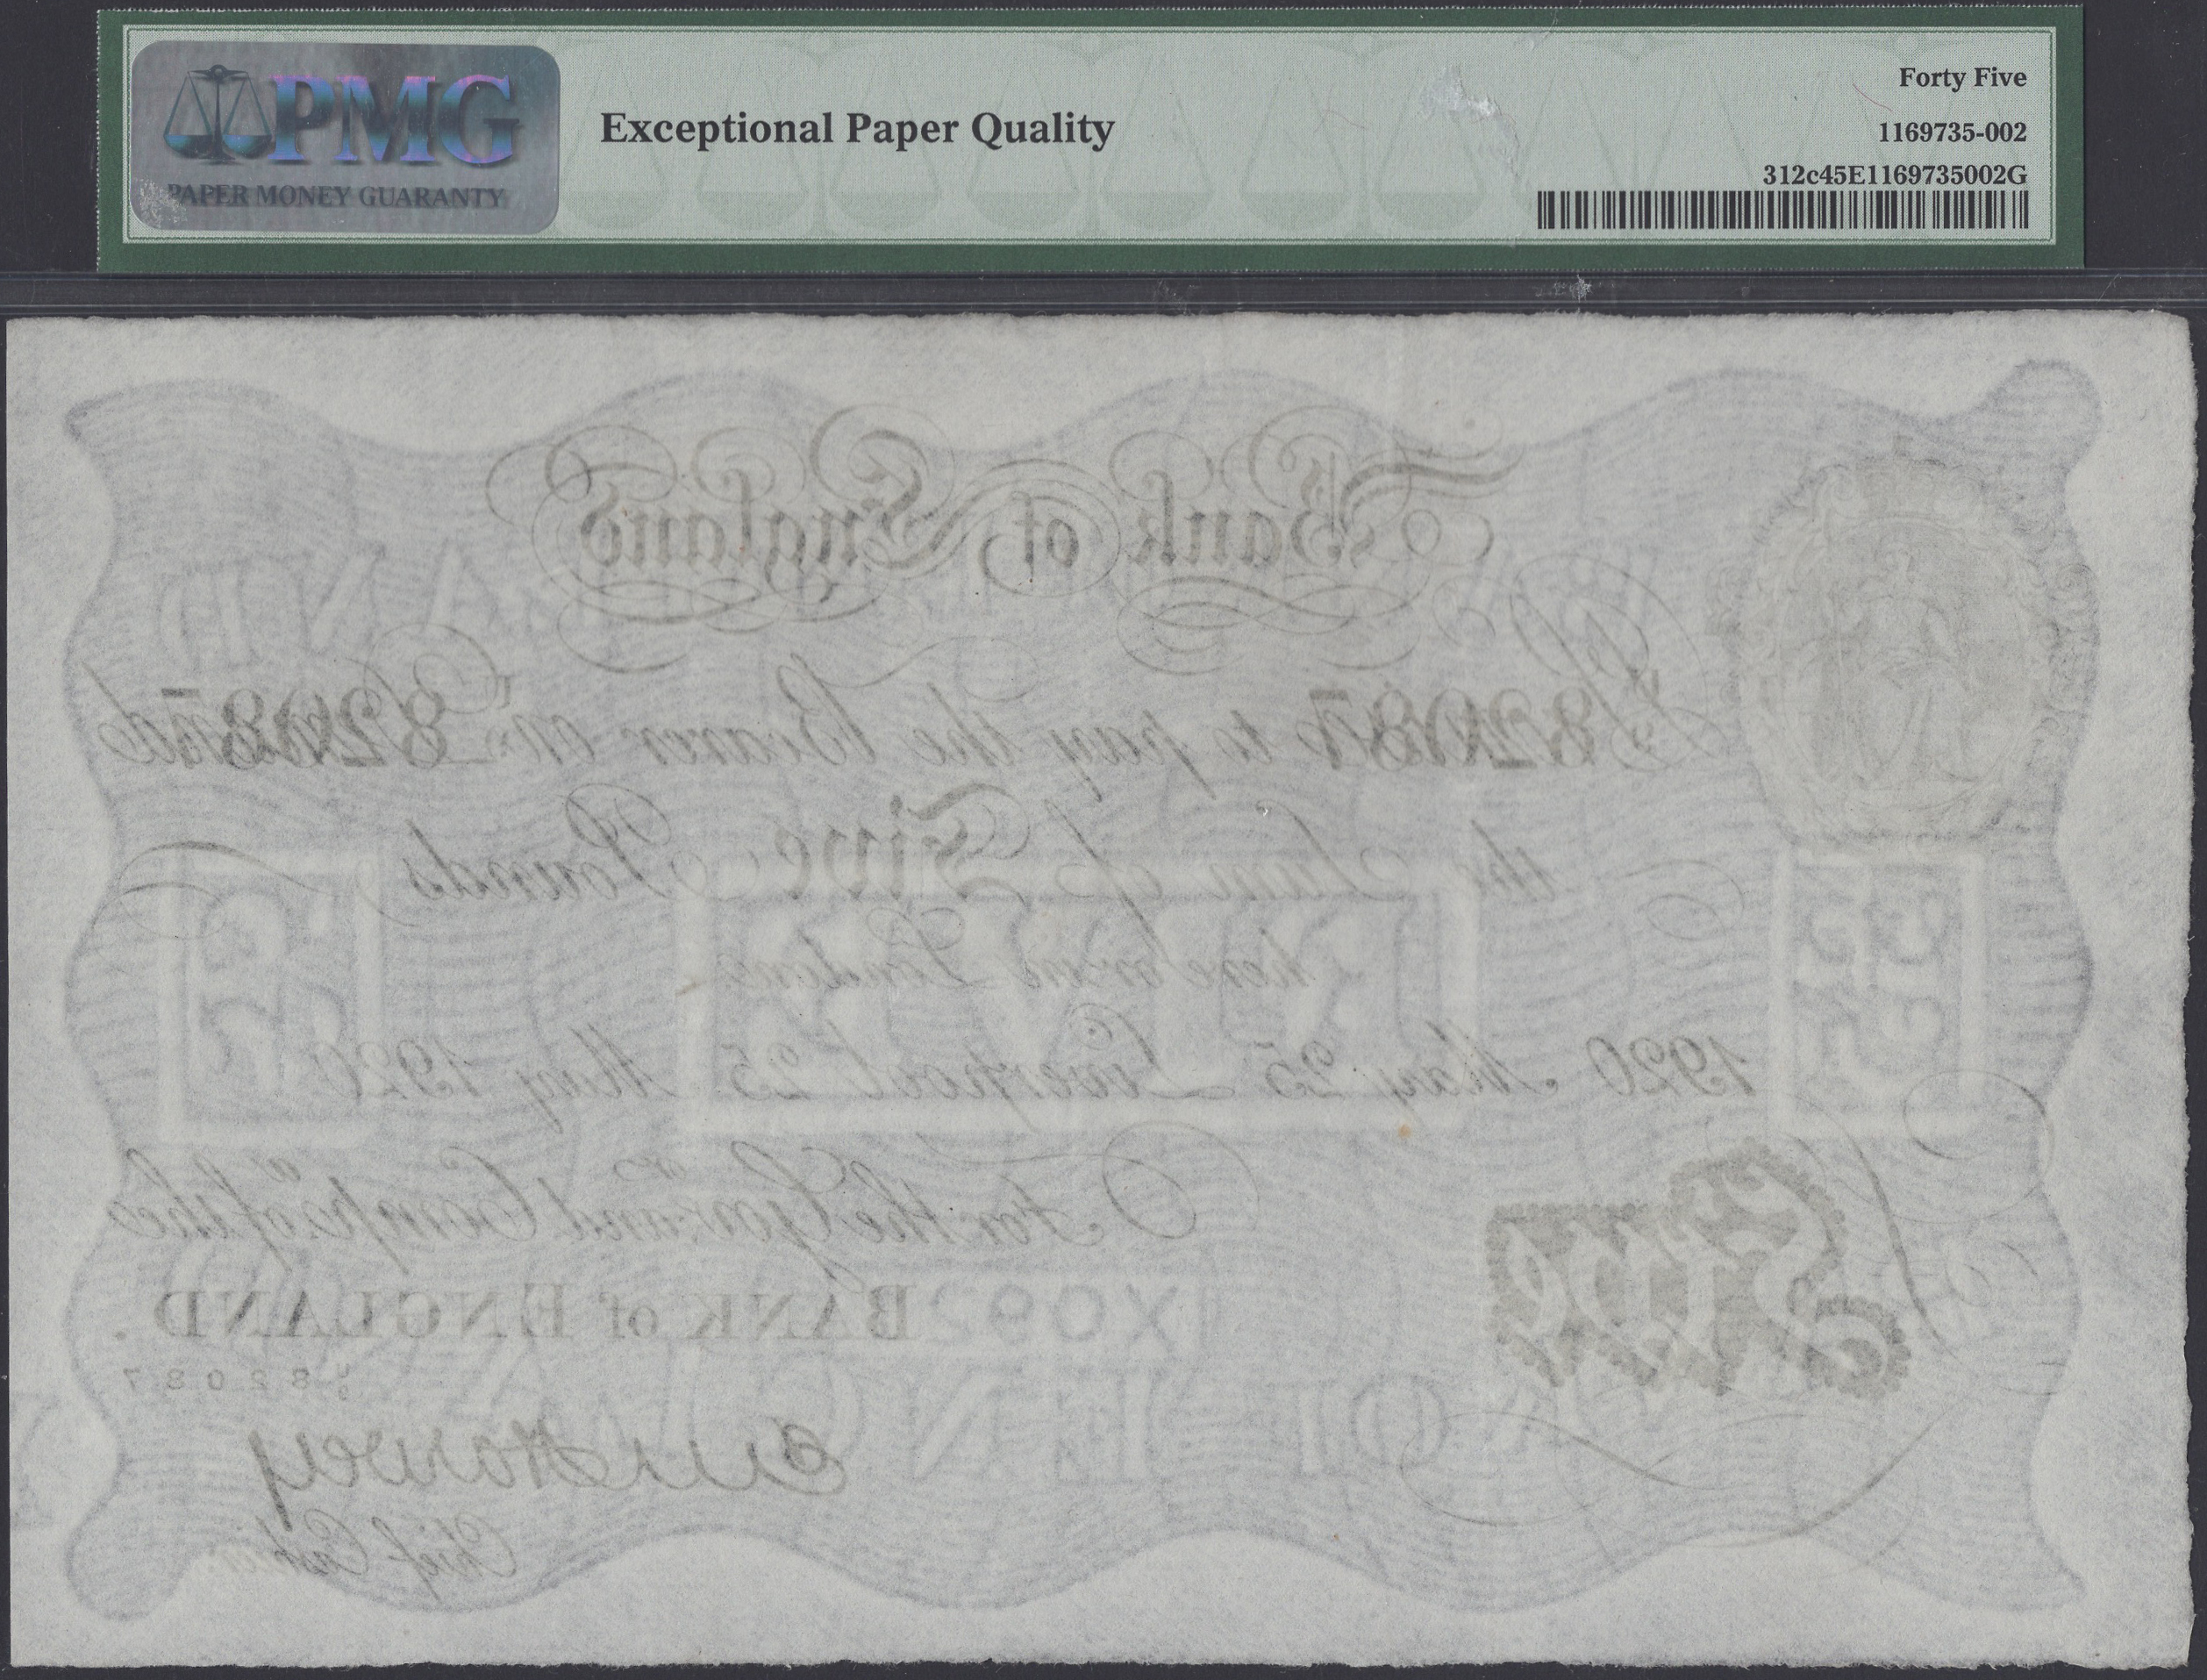 Bank of England, Ernest M. Harvey, Â£5, Liverpool, 25 May 1920, serial number U/9 82087, in... - Image 2 of 2